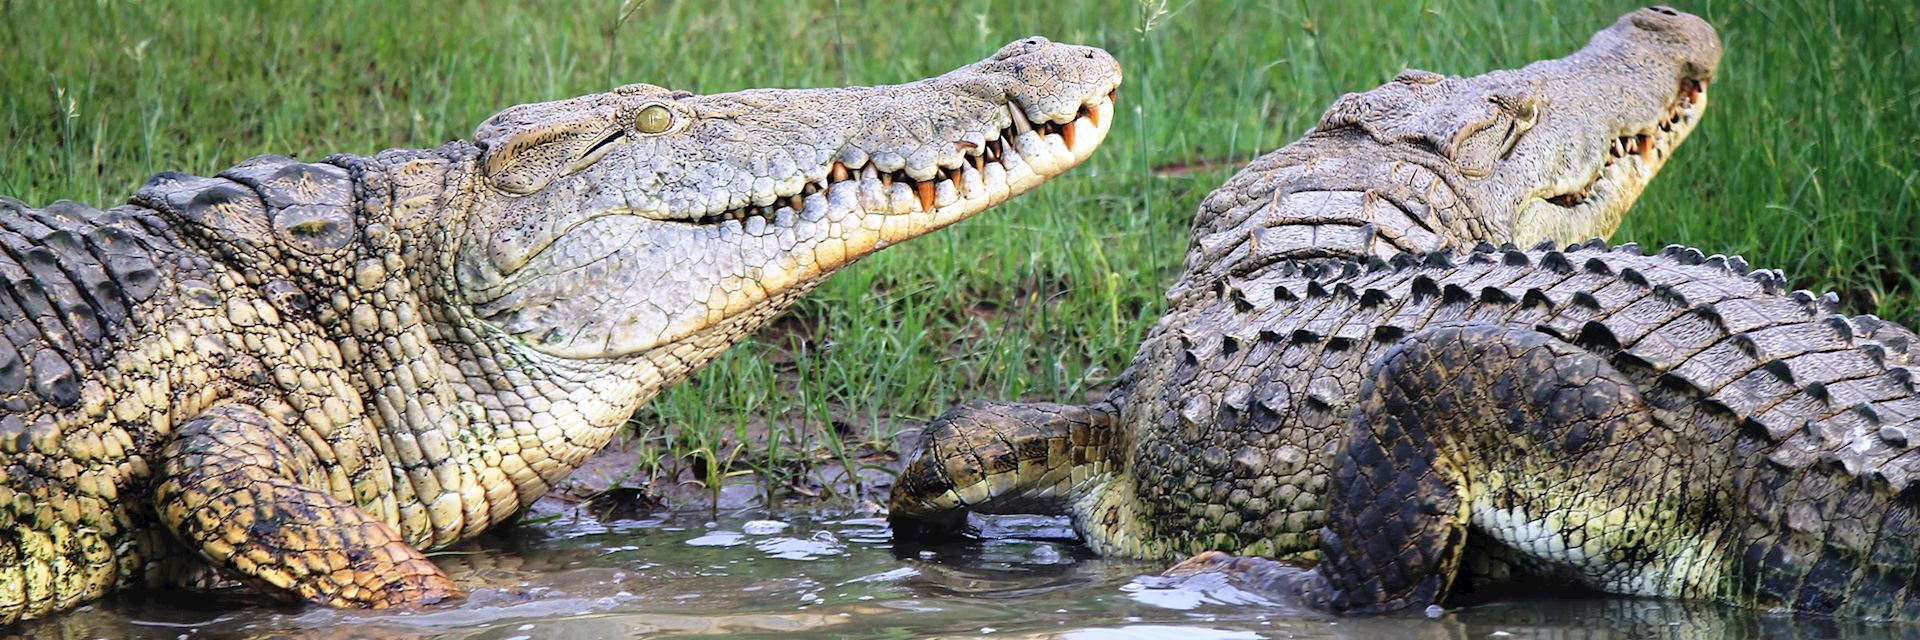 Crocodiles in Nyerere National Park